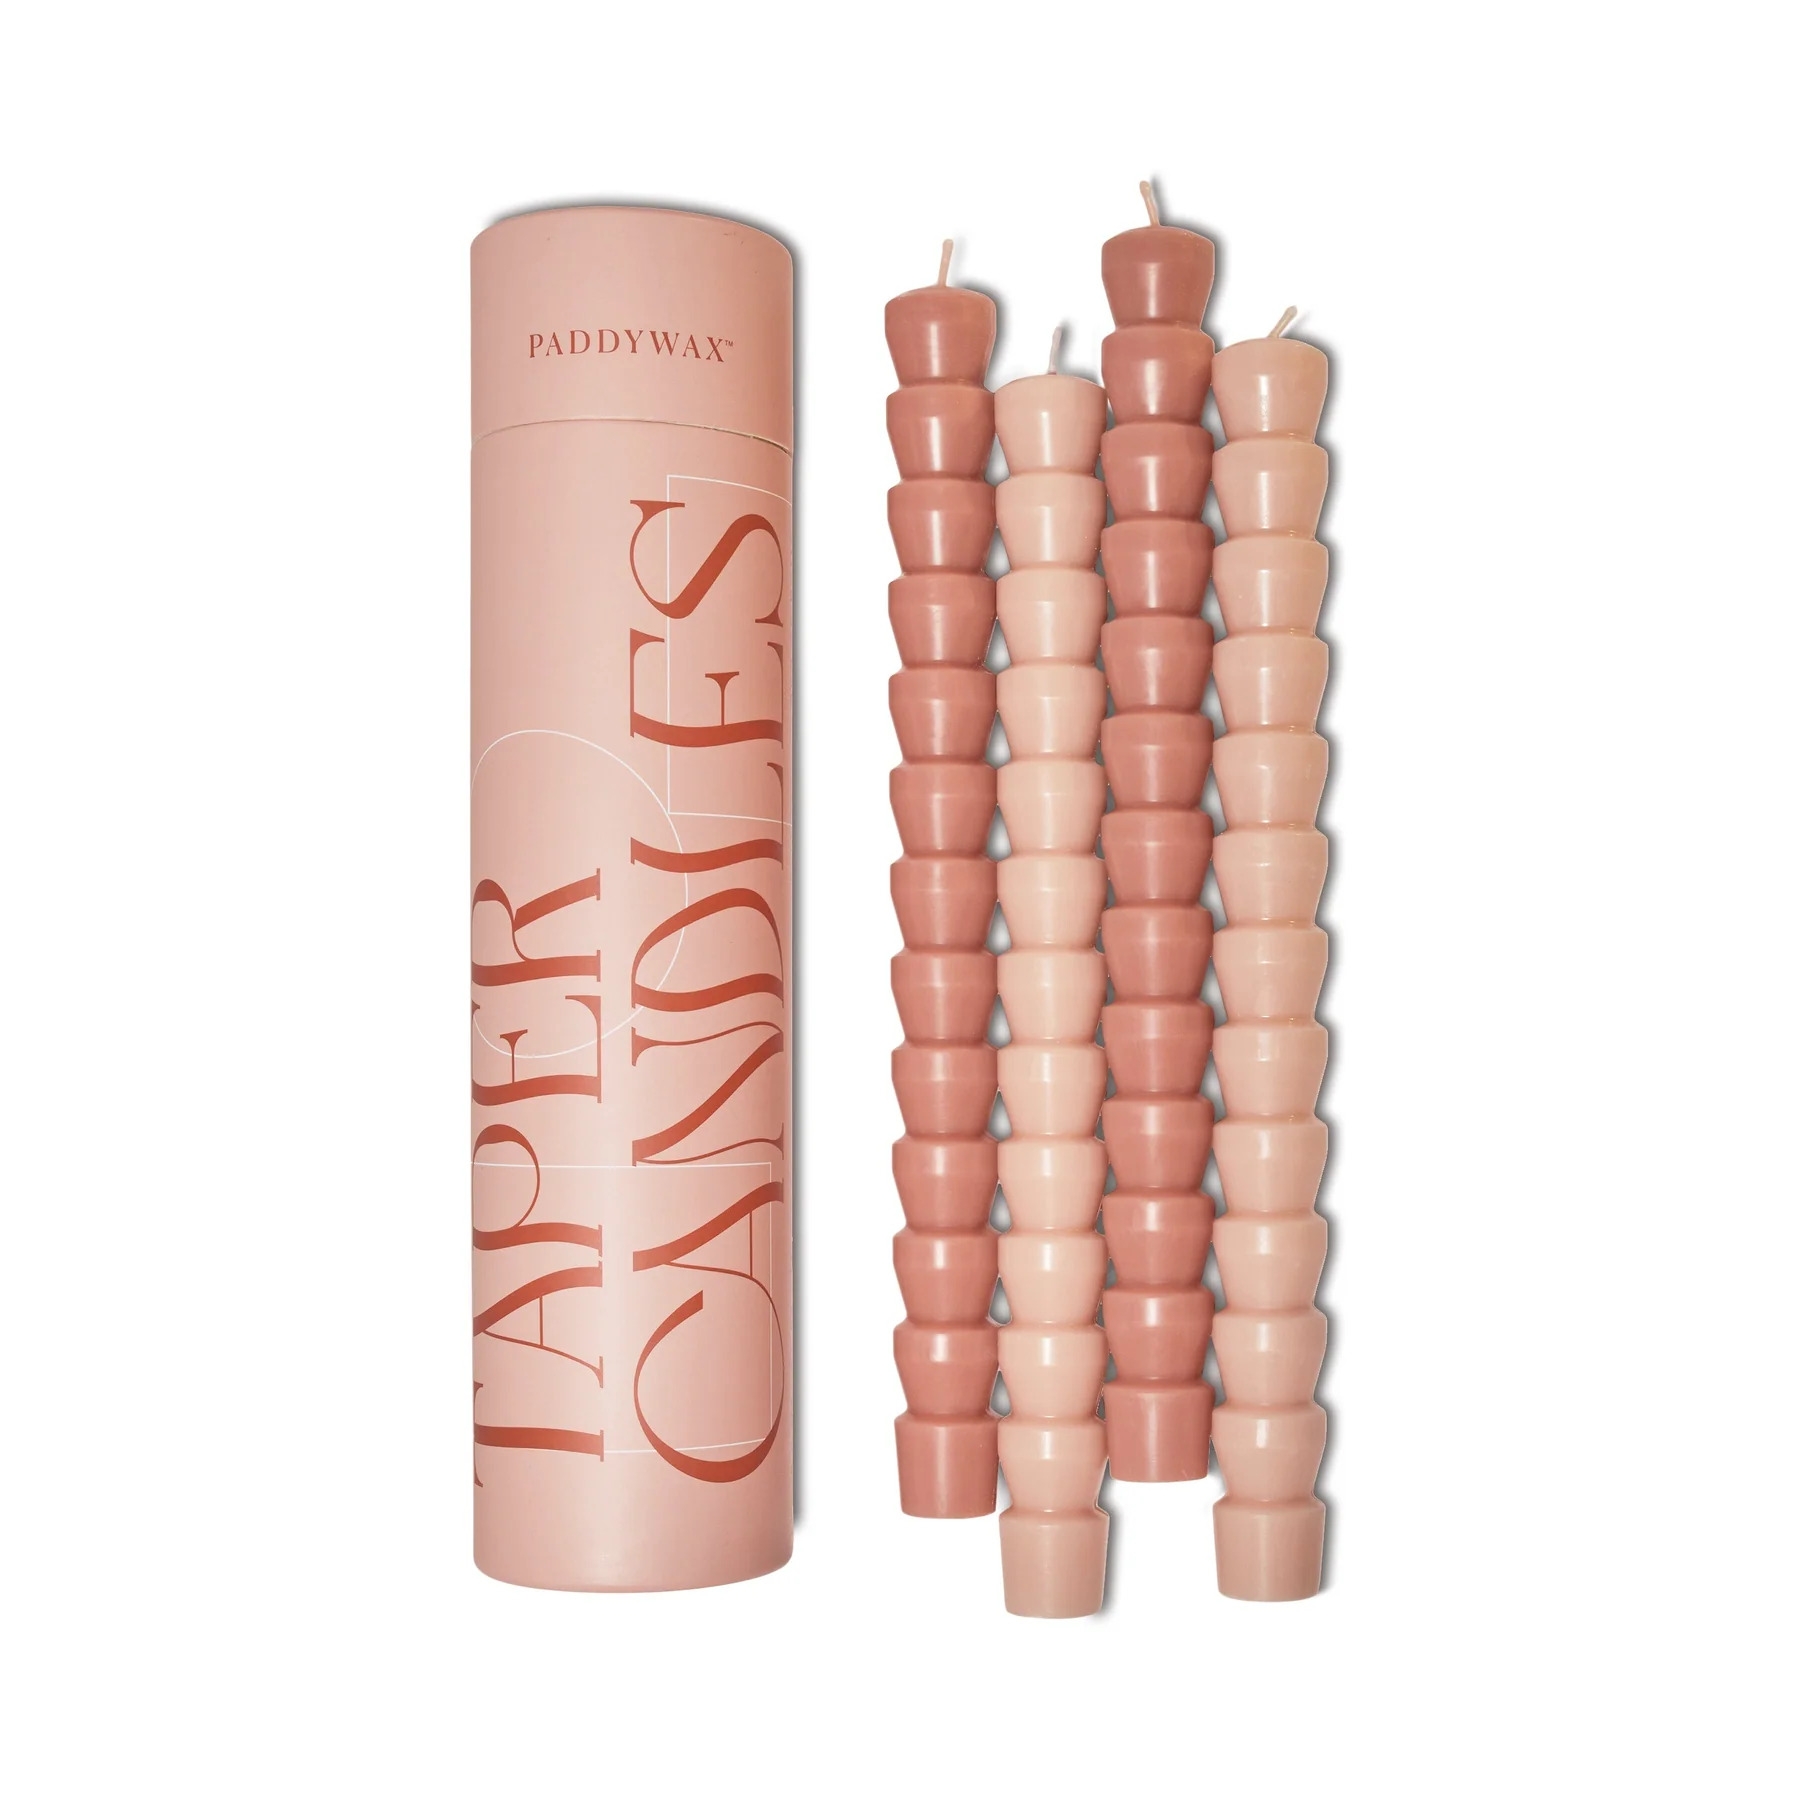 paddywax-taper-candle-set-pink-and-blush